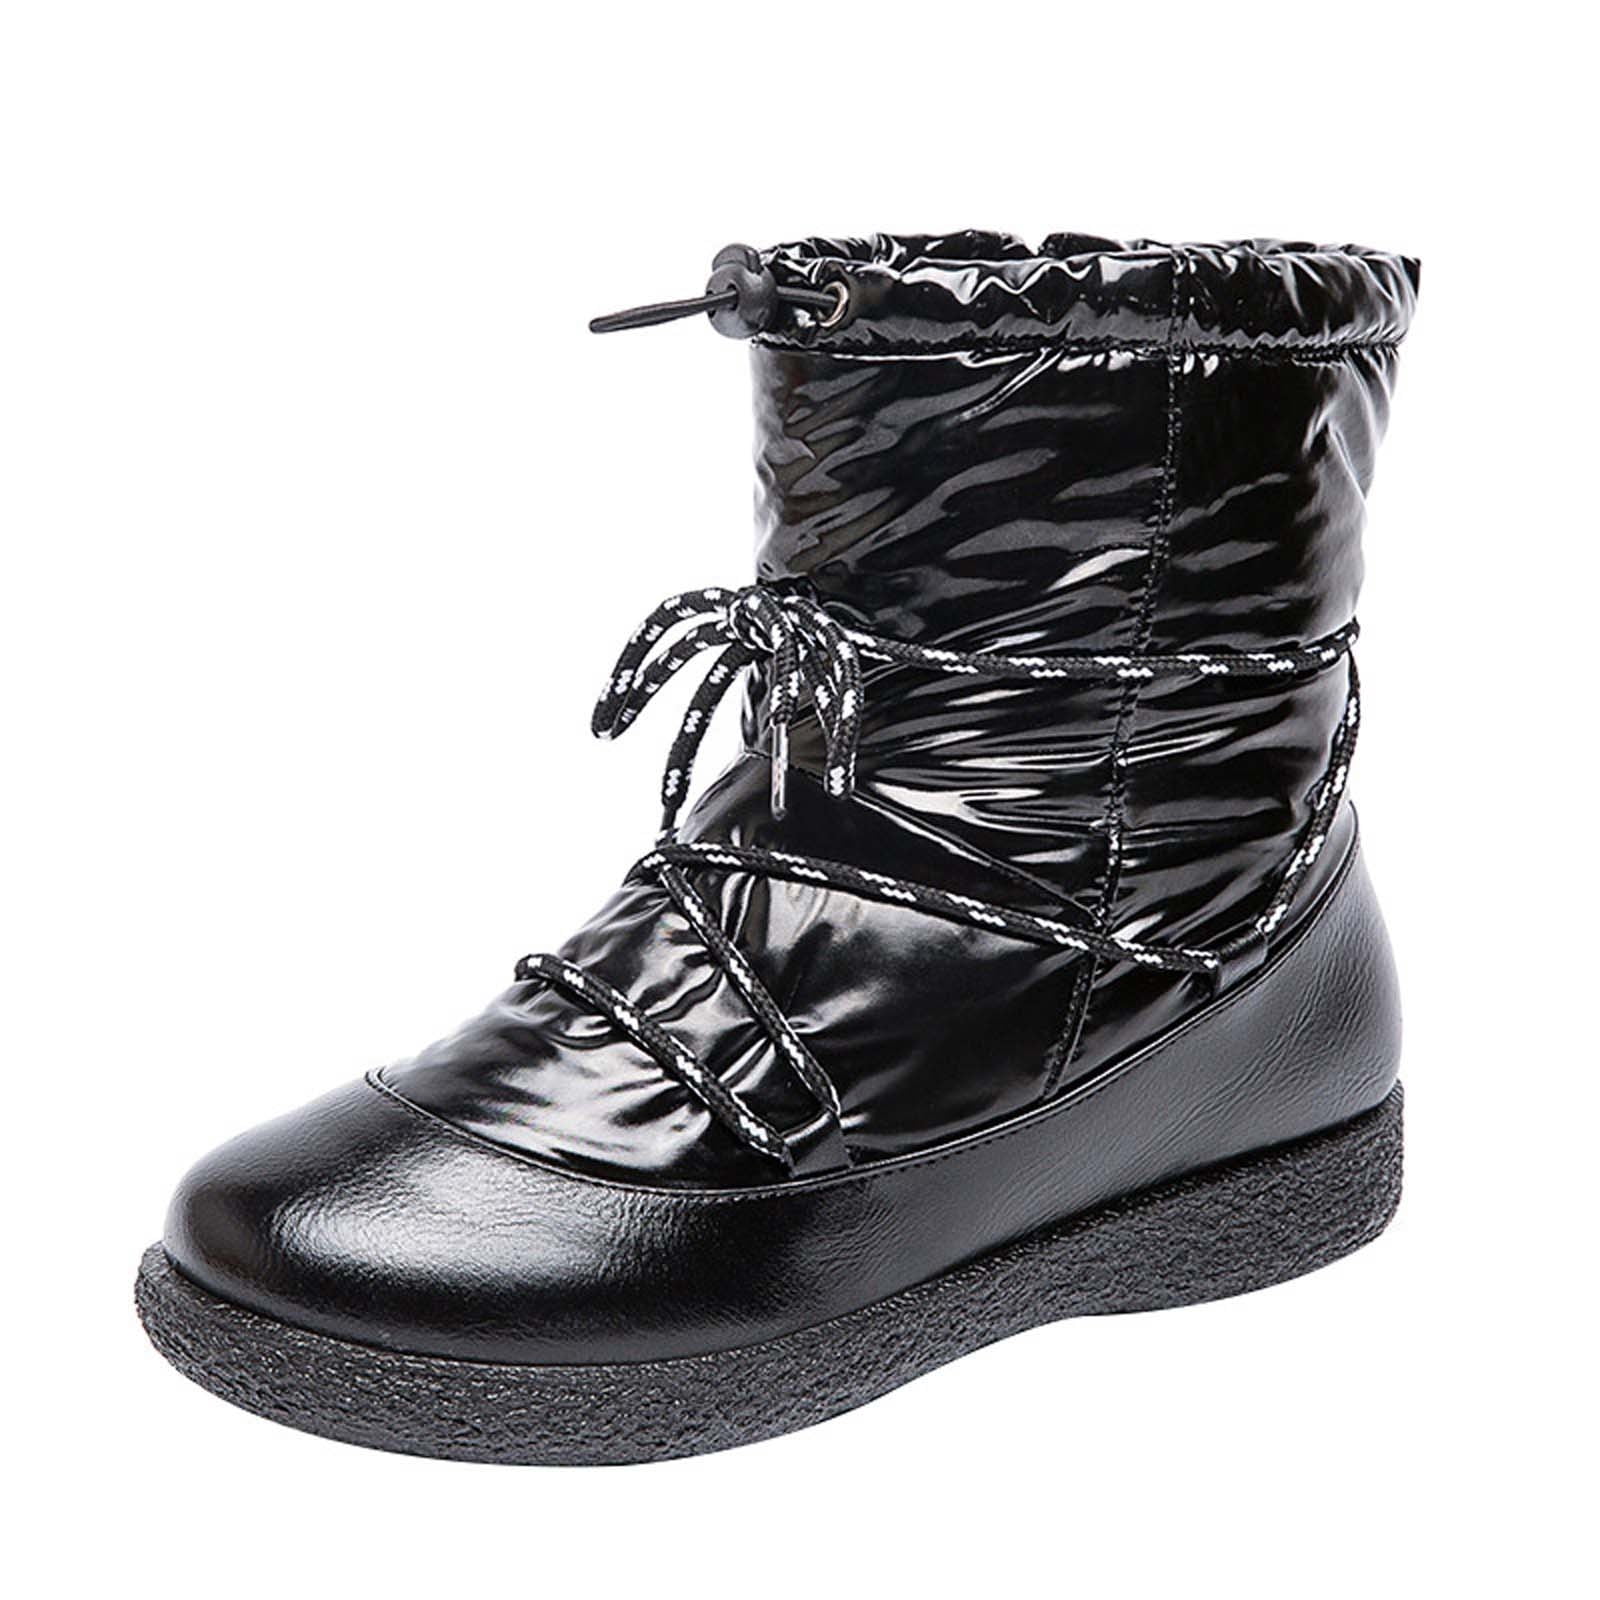 Womens Ankle Boots Lace Up Low Heels Sport Casual Shoes Waterproof Antiskid Ladies Warm Booties